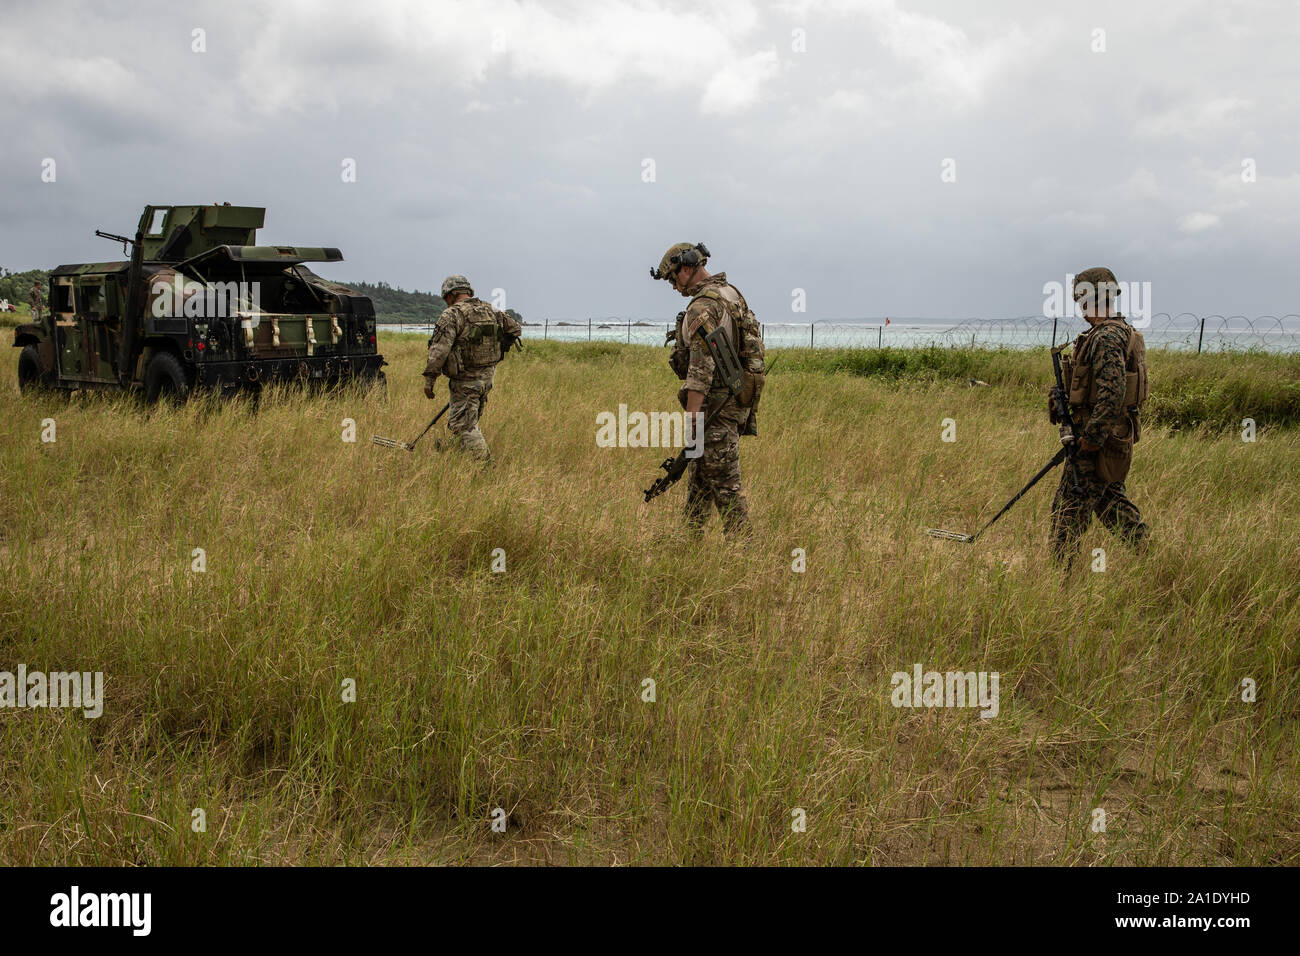 U.S. Marine Corps Sgt. Jonathan Whitby (right), U.S. Air Force Senior Airman Benjamen Dring and U.S. Army Staff Sgt. James Ahn sweep for land mines during an explosive ordnance disposal exercise at Kin Blue Training Area, Okinawa, Japan, Sept. 19, 2019.  The EOD exercise was designed to simulate conventional warfare and the use of conventional ordnance and involved the participation of three U.S. military branches and over 43 different military occupational specialties within III Marine Expeditionary Force. Whitby, a native of Tempe, Arizona, is an EOD technician with EOD Company, 9th Engineer Stock Photo